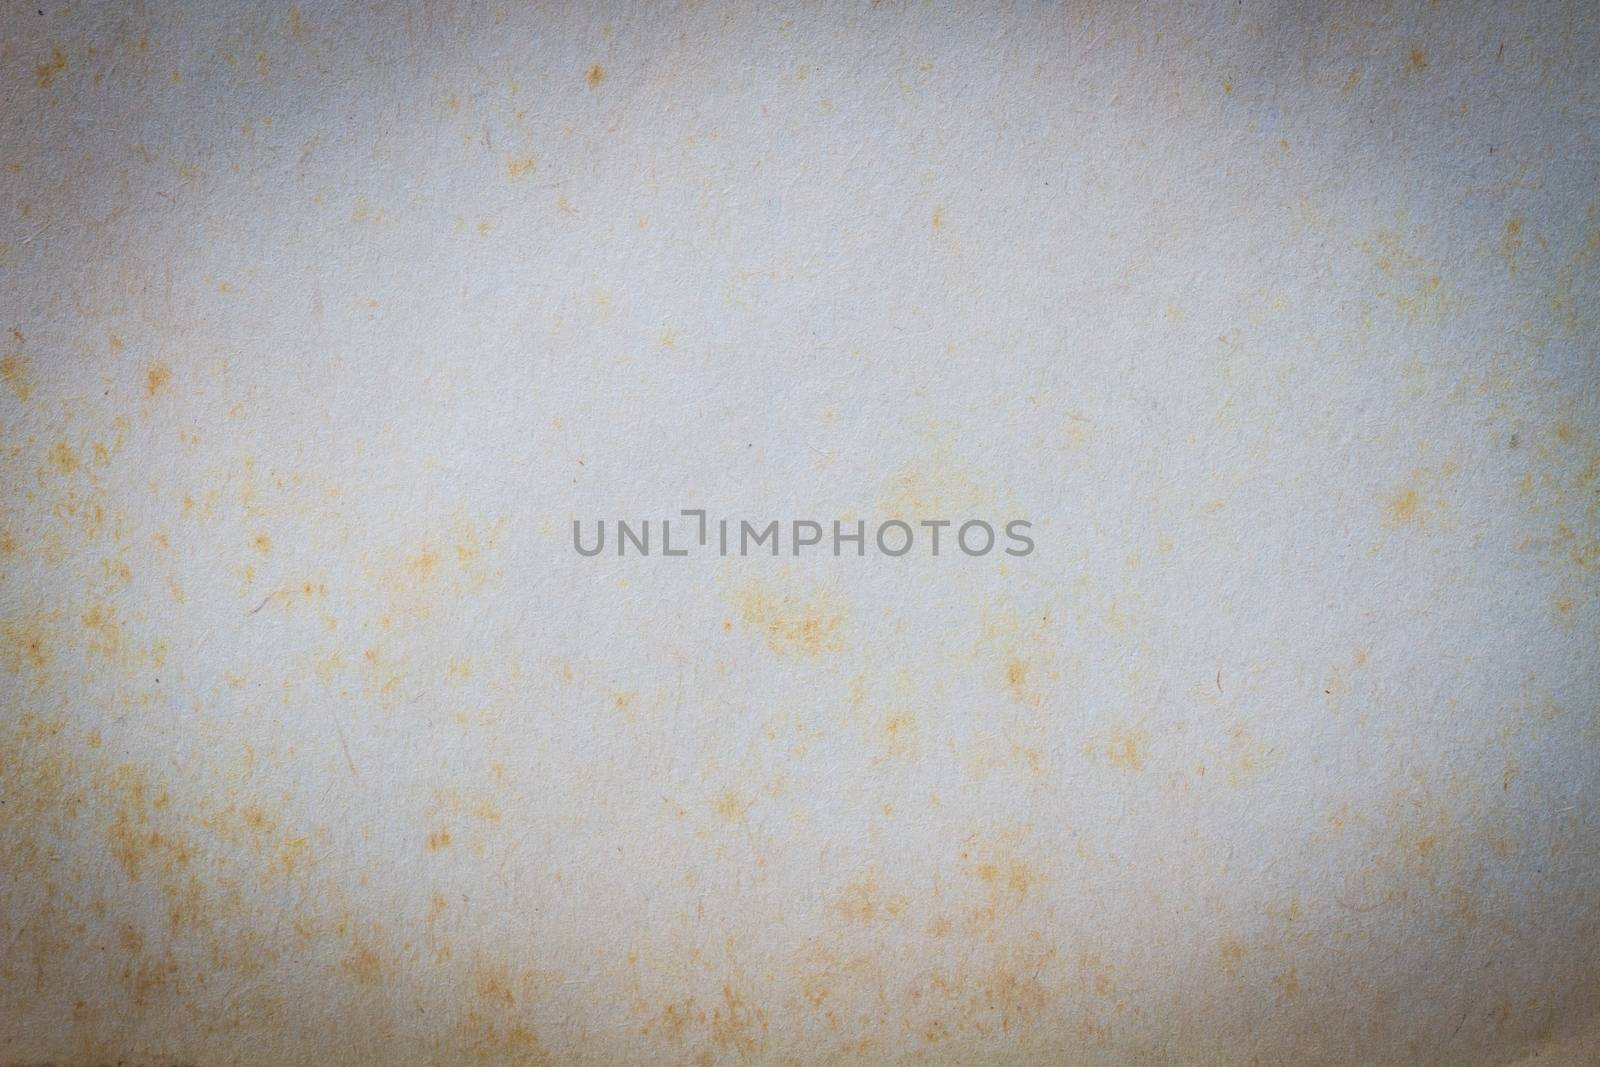 texture of old paper with yellow stain, background, copyspace and vignette